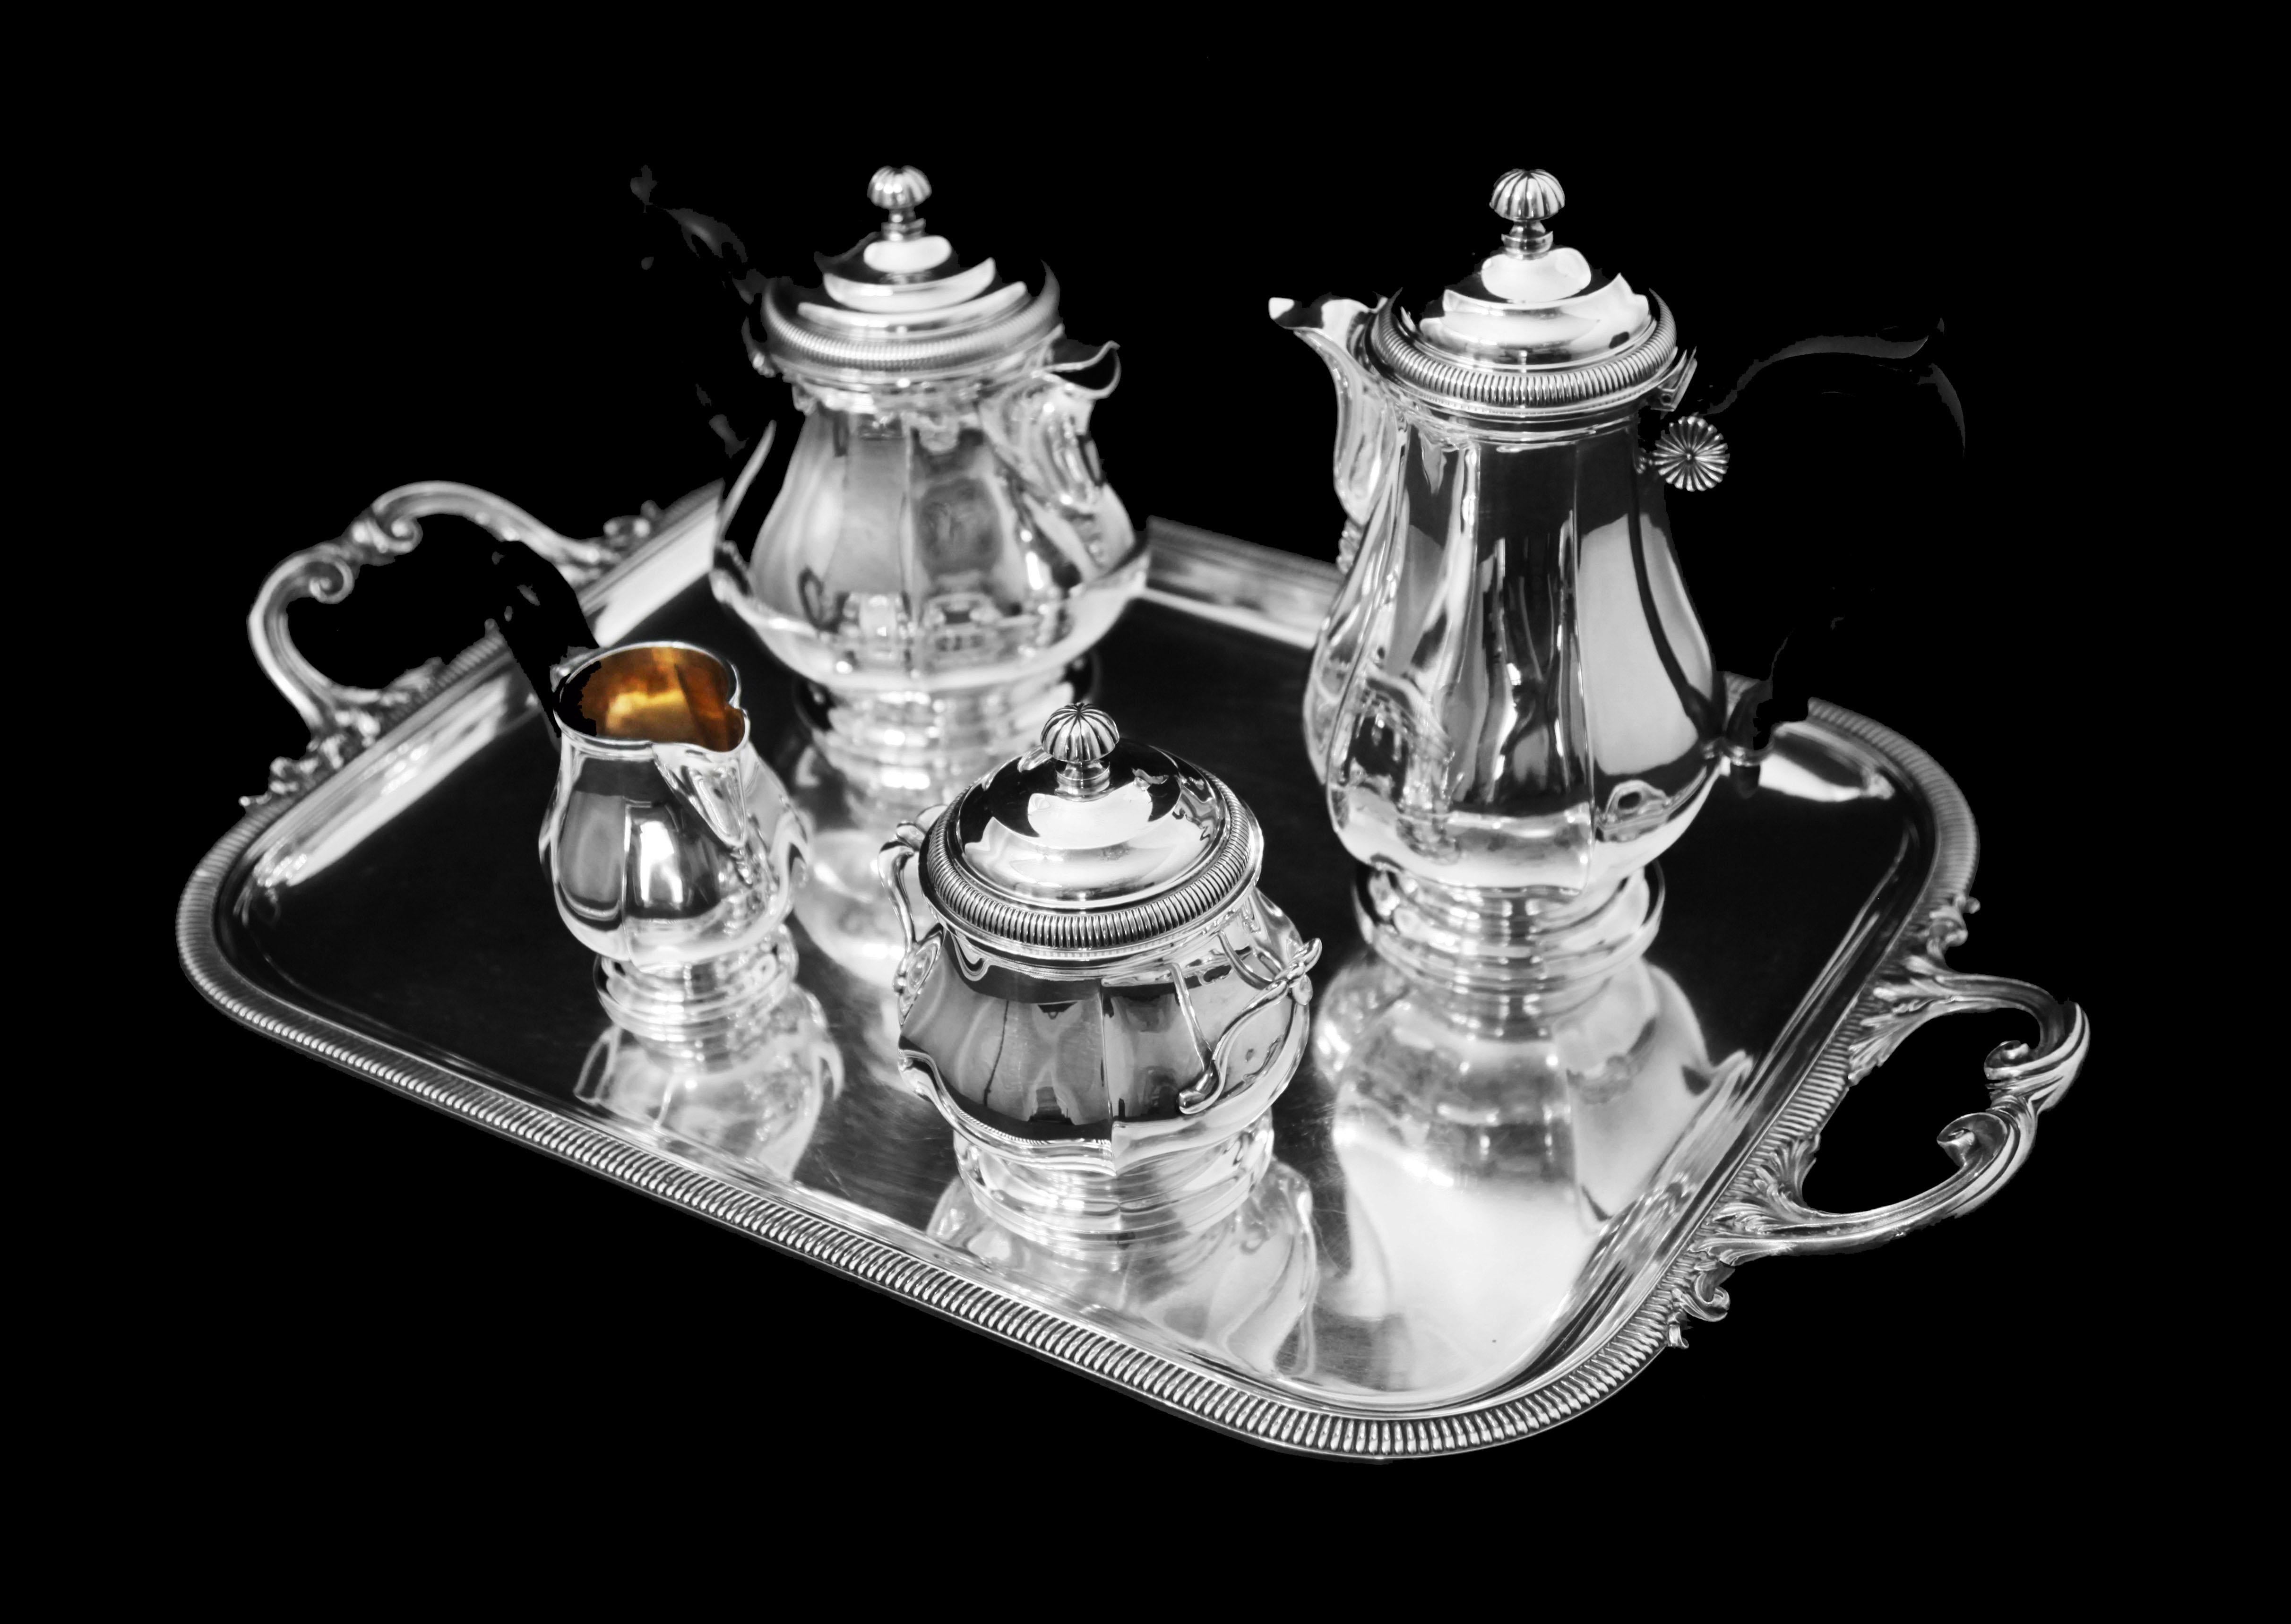 Direct from Paris, A Stunning Louis XVI, 4pc. Sterling Silver Tea / Coffee Set by France's Premier Silversmiths 